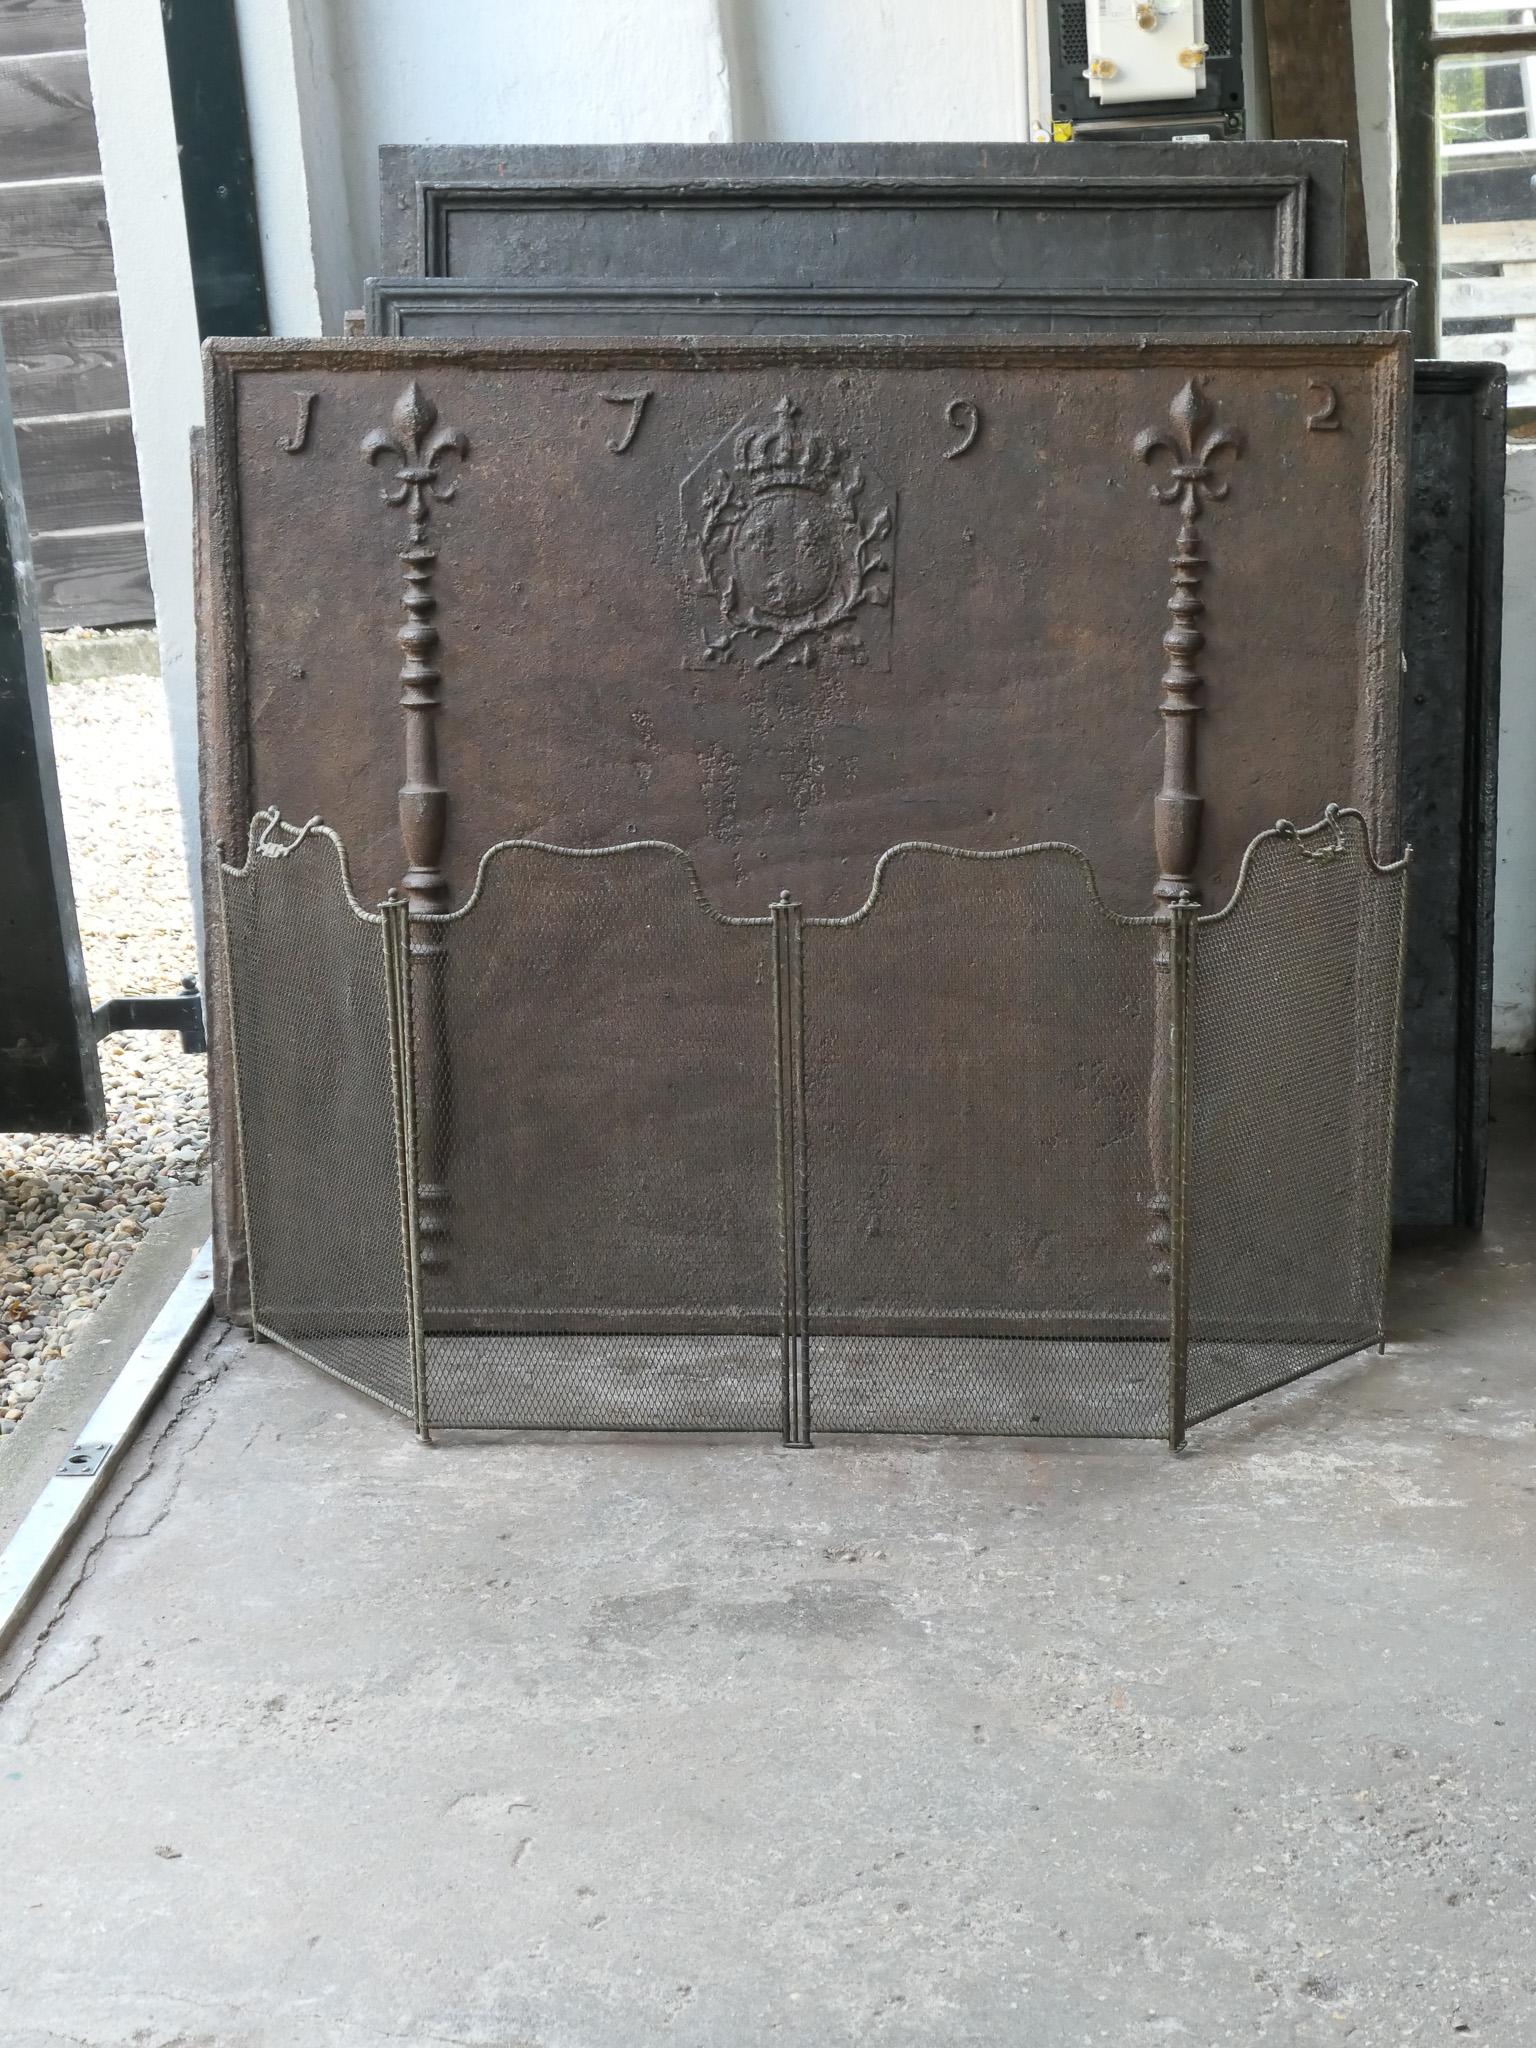 19th century French Napoleon III 4-panel fireplace screen. The screen is made of iron and iron mesh and has a brown color. It is in a good condition and is fit for use in front of the fireplace.